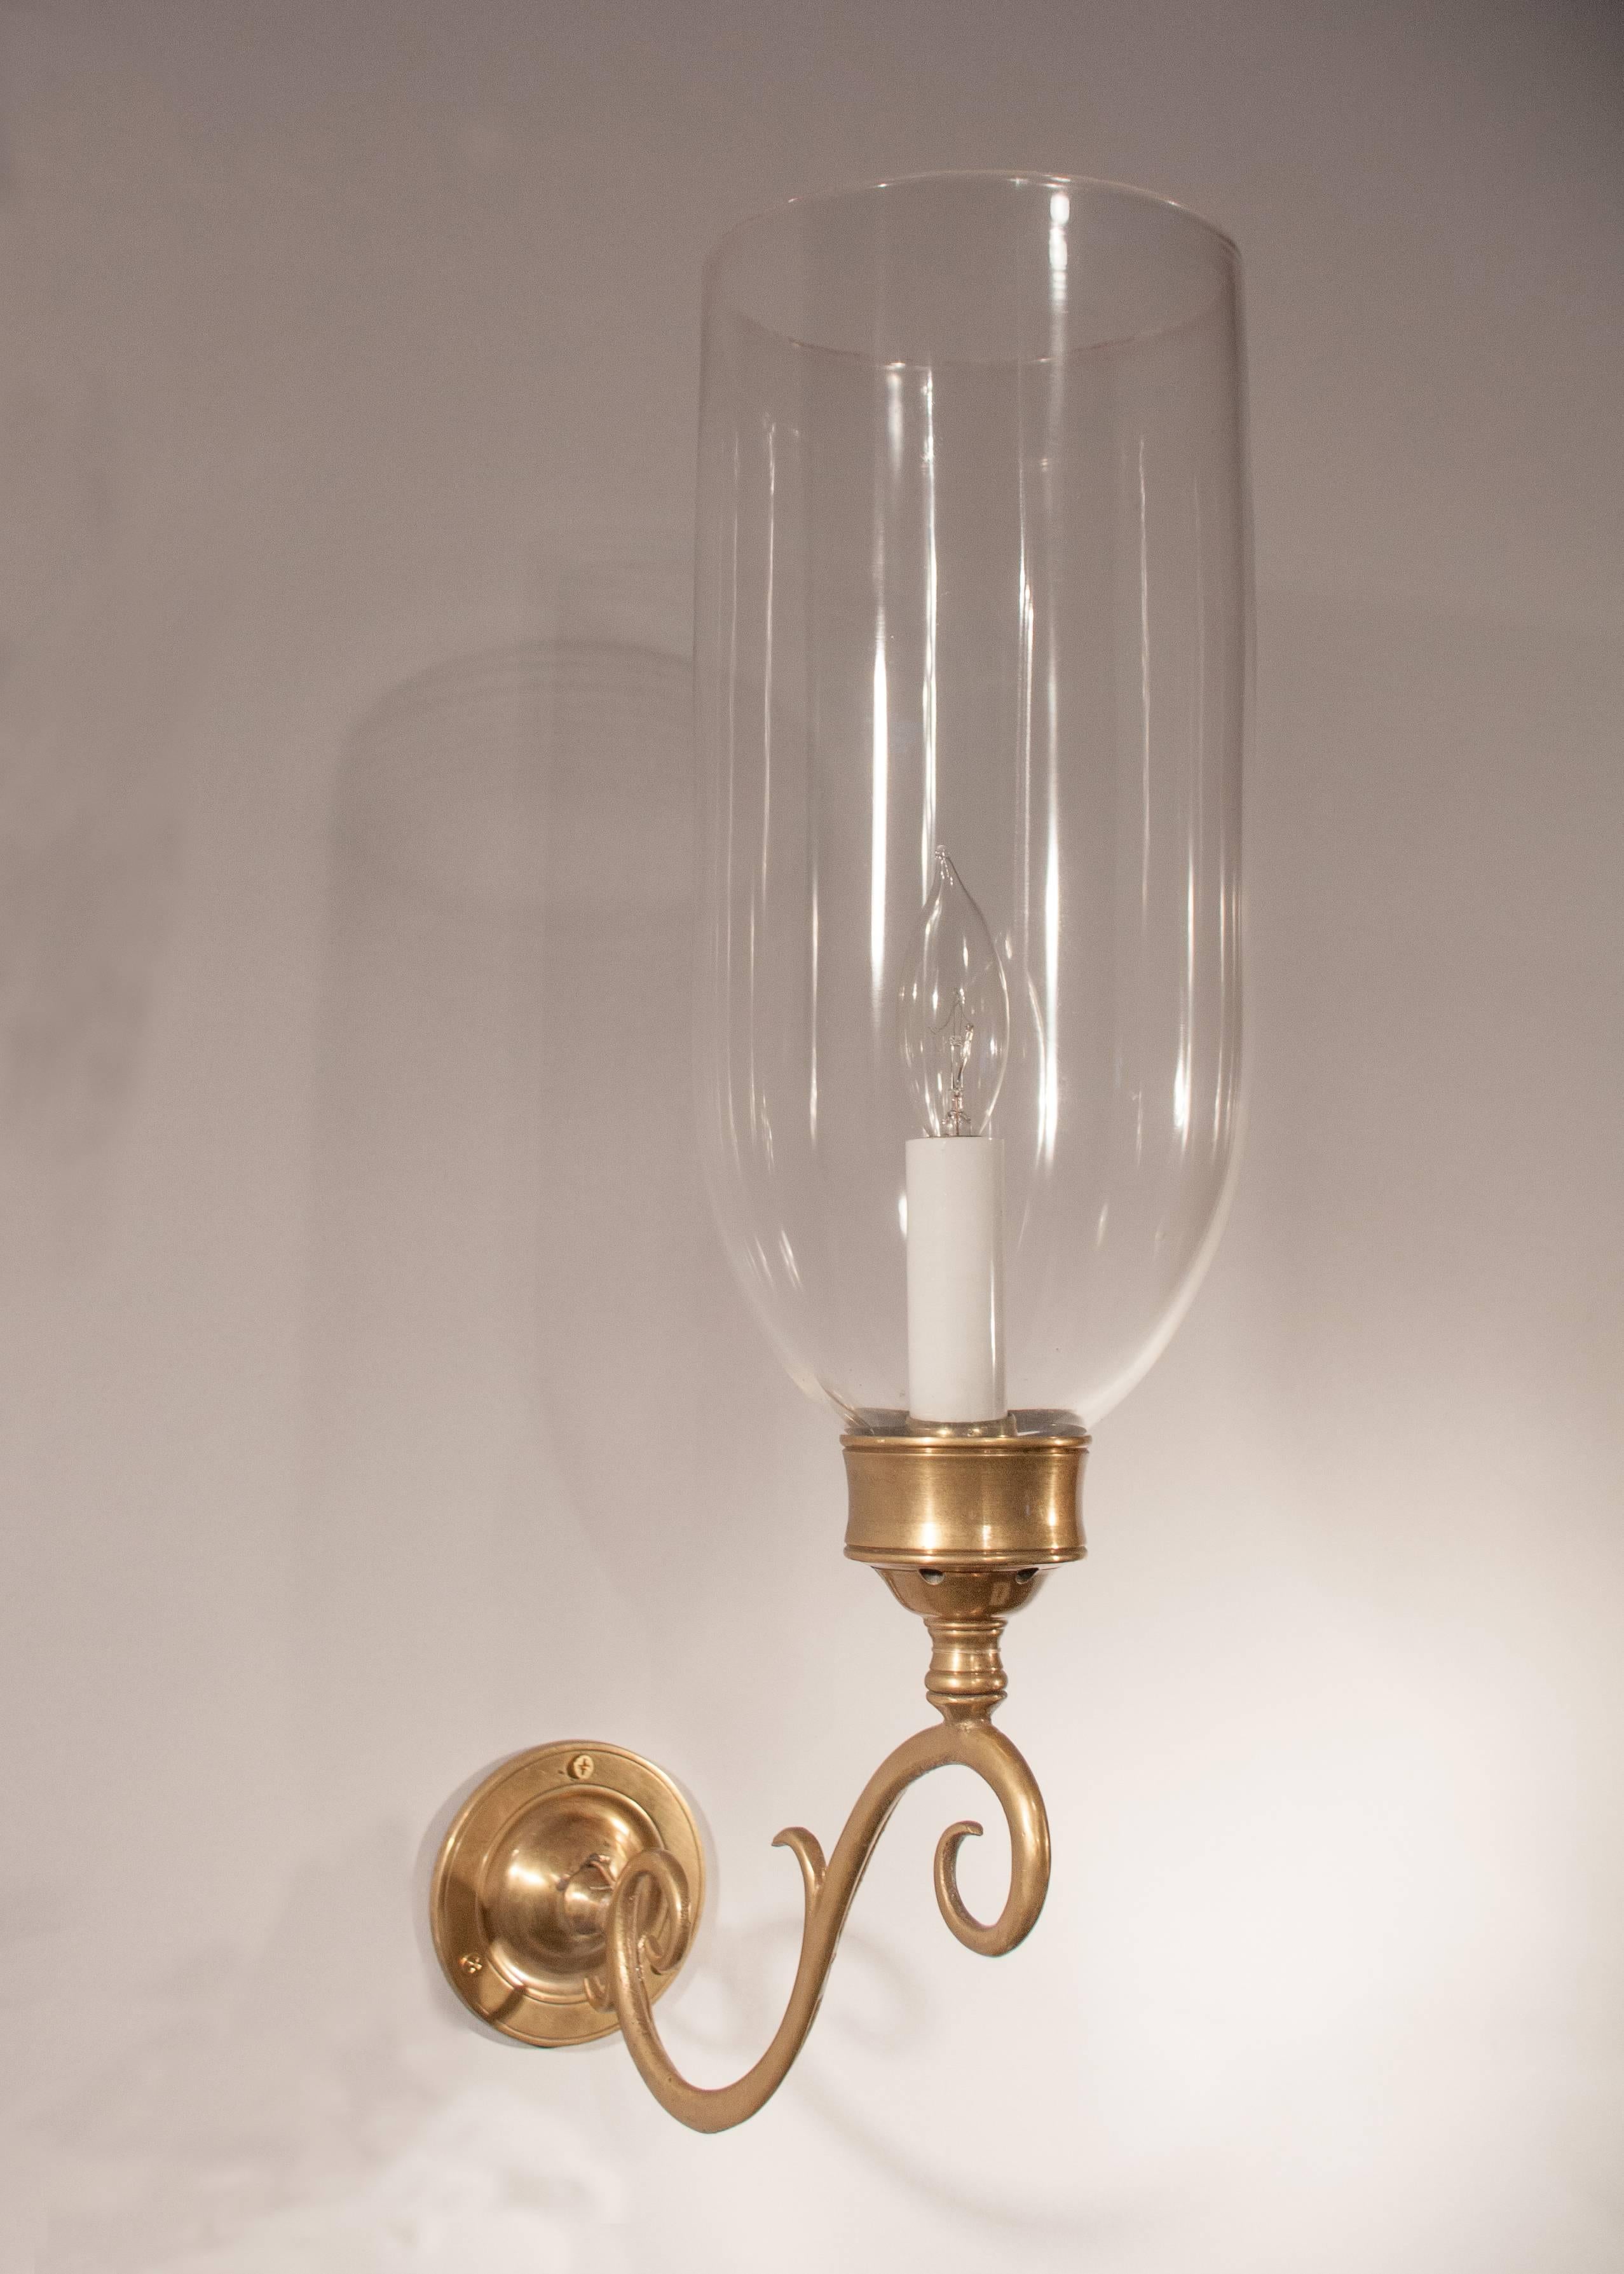 Pair of English hand blown glass hurricane sconce shades, circa 1870. Small air bubbles in the glass reflect the quality and age of the shades. The sconces have been newly French wired to accommodate a single candelabra bulb up to 60 watts. Custom